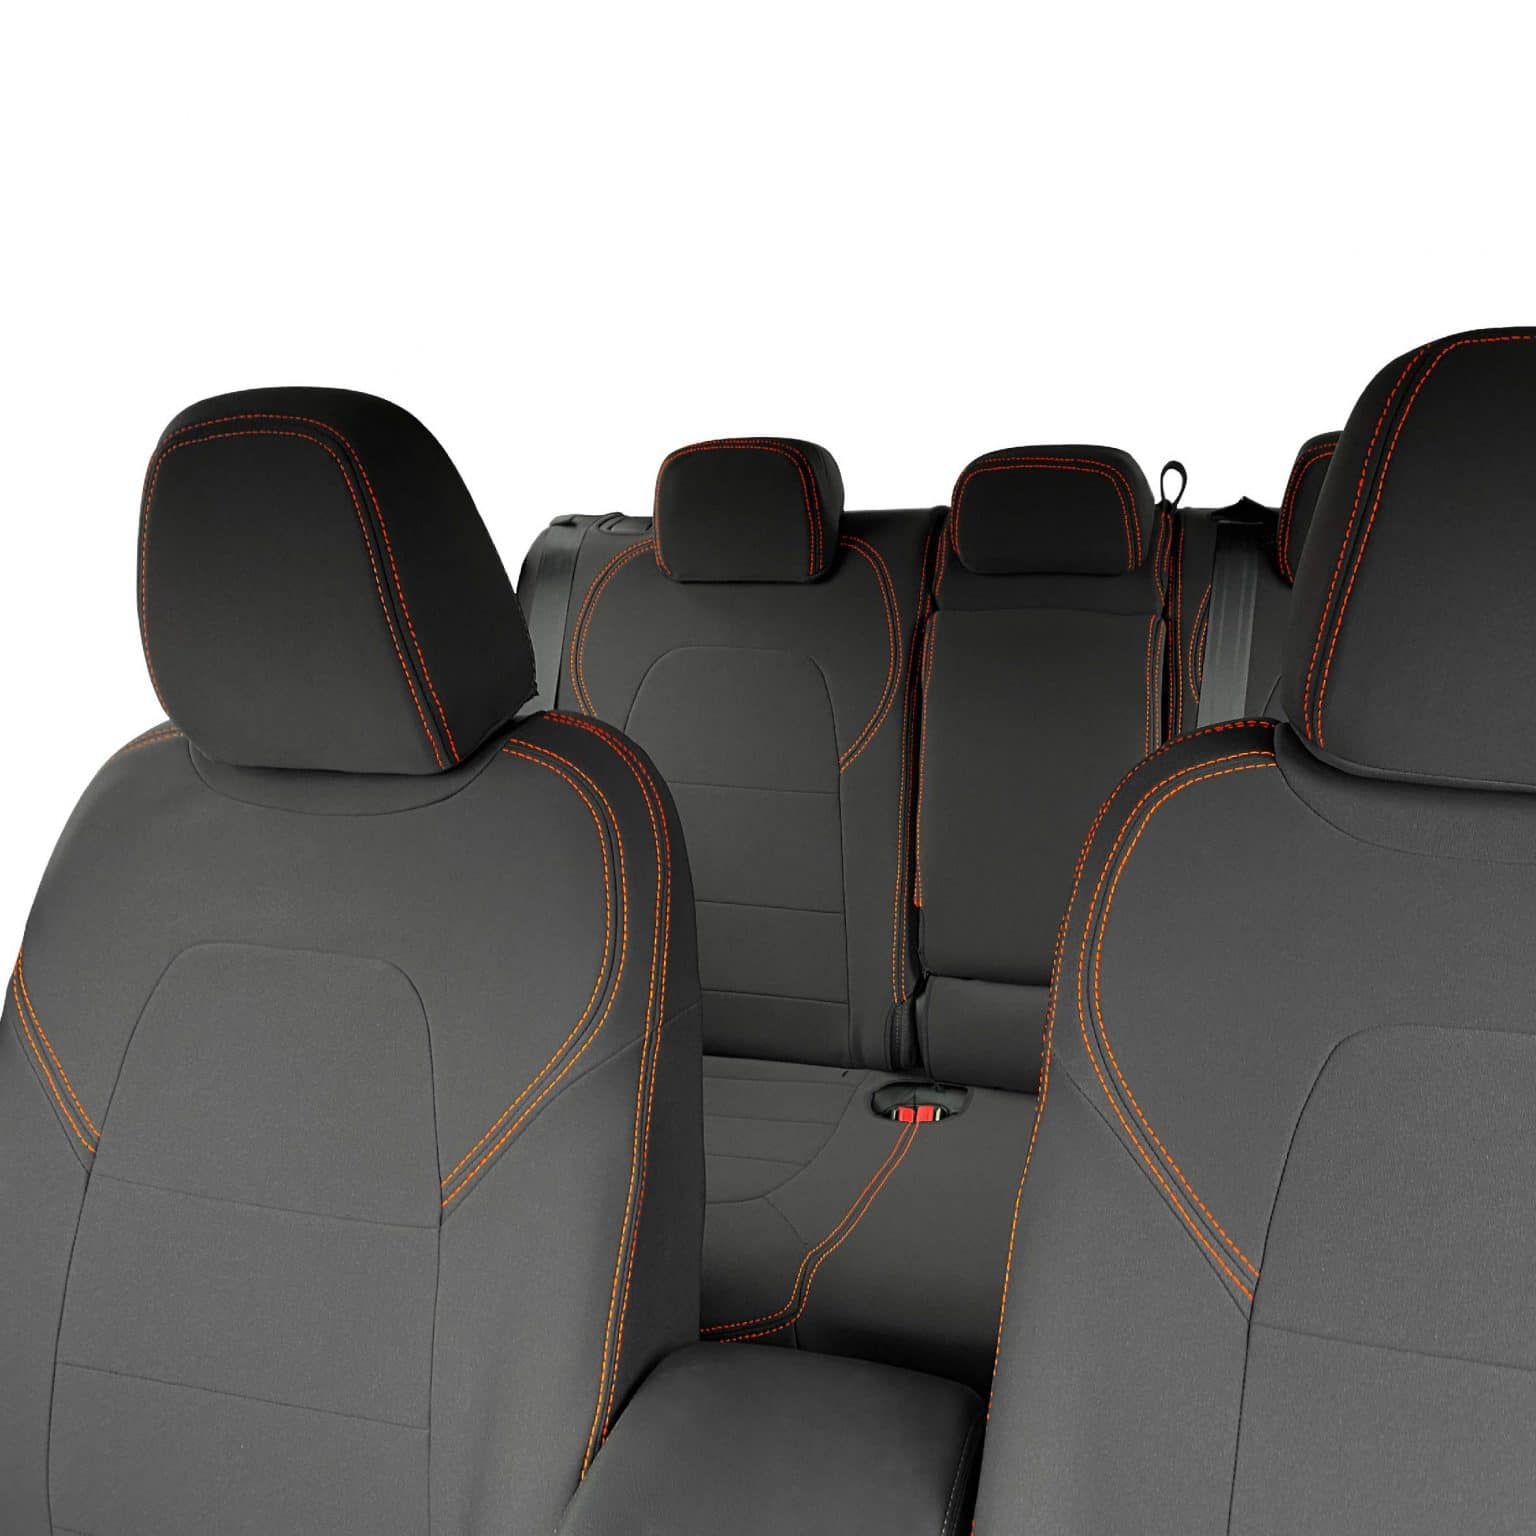 FULL-BACK REAR Seat Cover + Armrest Cover for Mazda CX-5 (MC517-Ra-P) | Dingo Trails Back Seat Cover For Mazda Cx 5